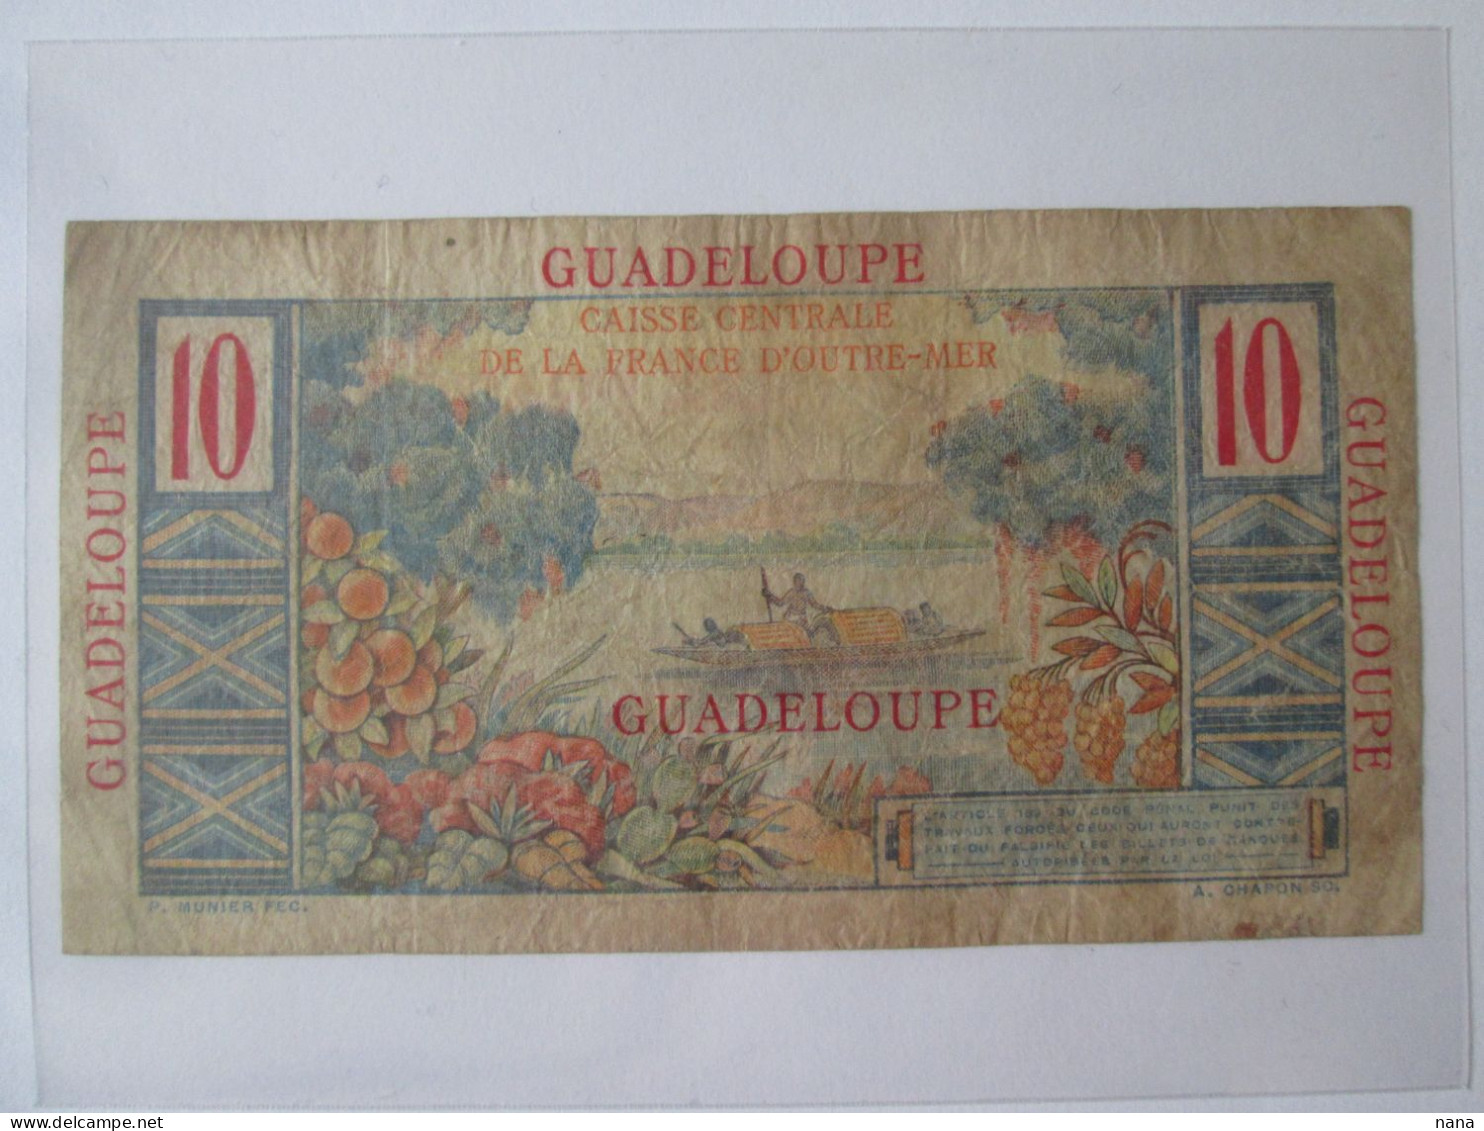 Rare! Guadeloupe 10 Francs 1947 Banknote See Pictures - Ohne Zuordnung